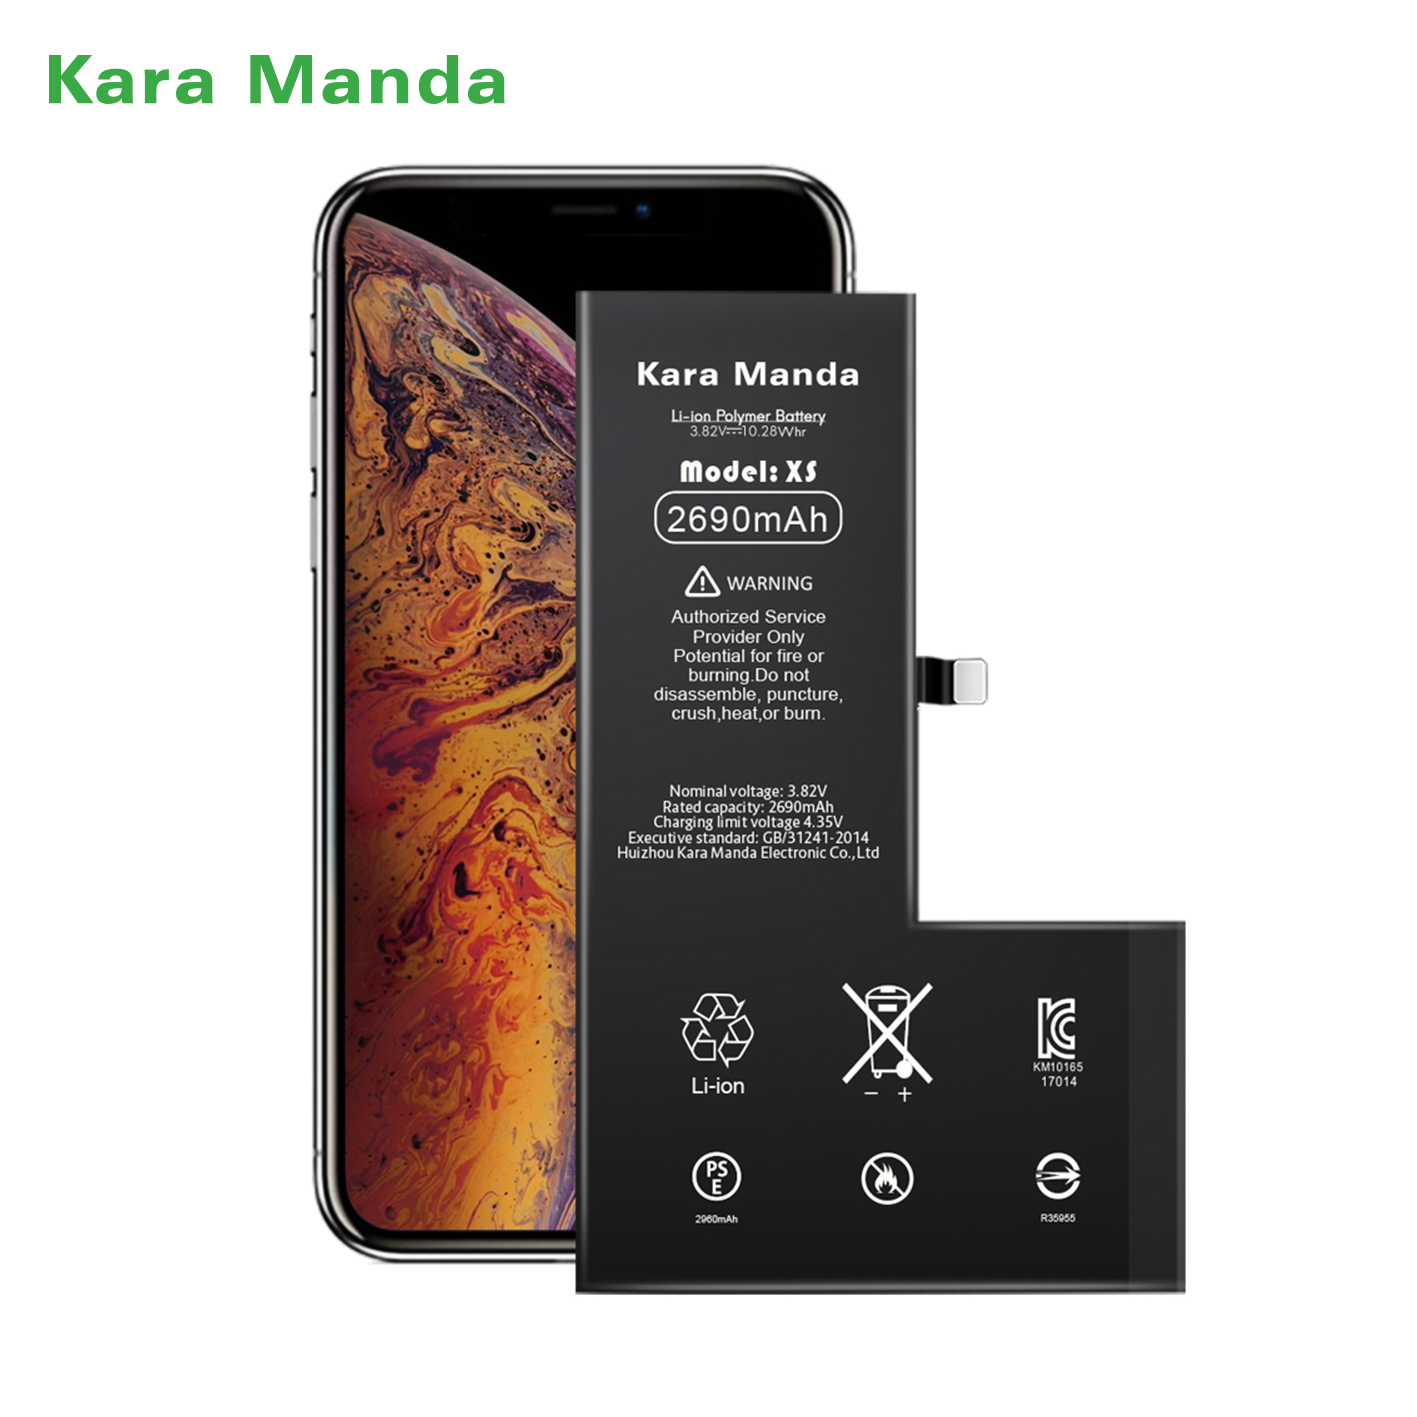 Factory Direct: Get High-Quality IPhone XS Replacement Battery with Original 2690mAh Capacity - <a href='/wholesale-oem/'>Wholesale OEM</a> | Kara Manda